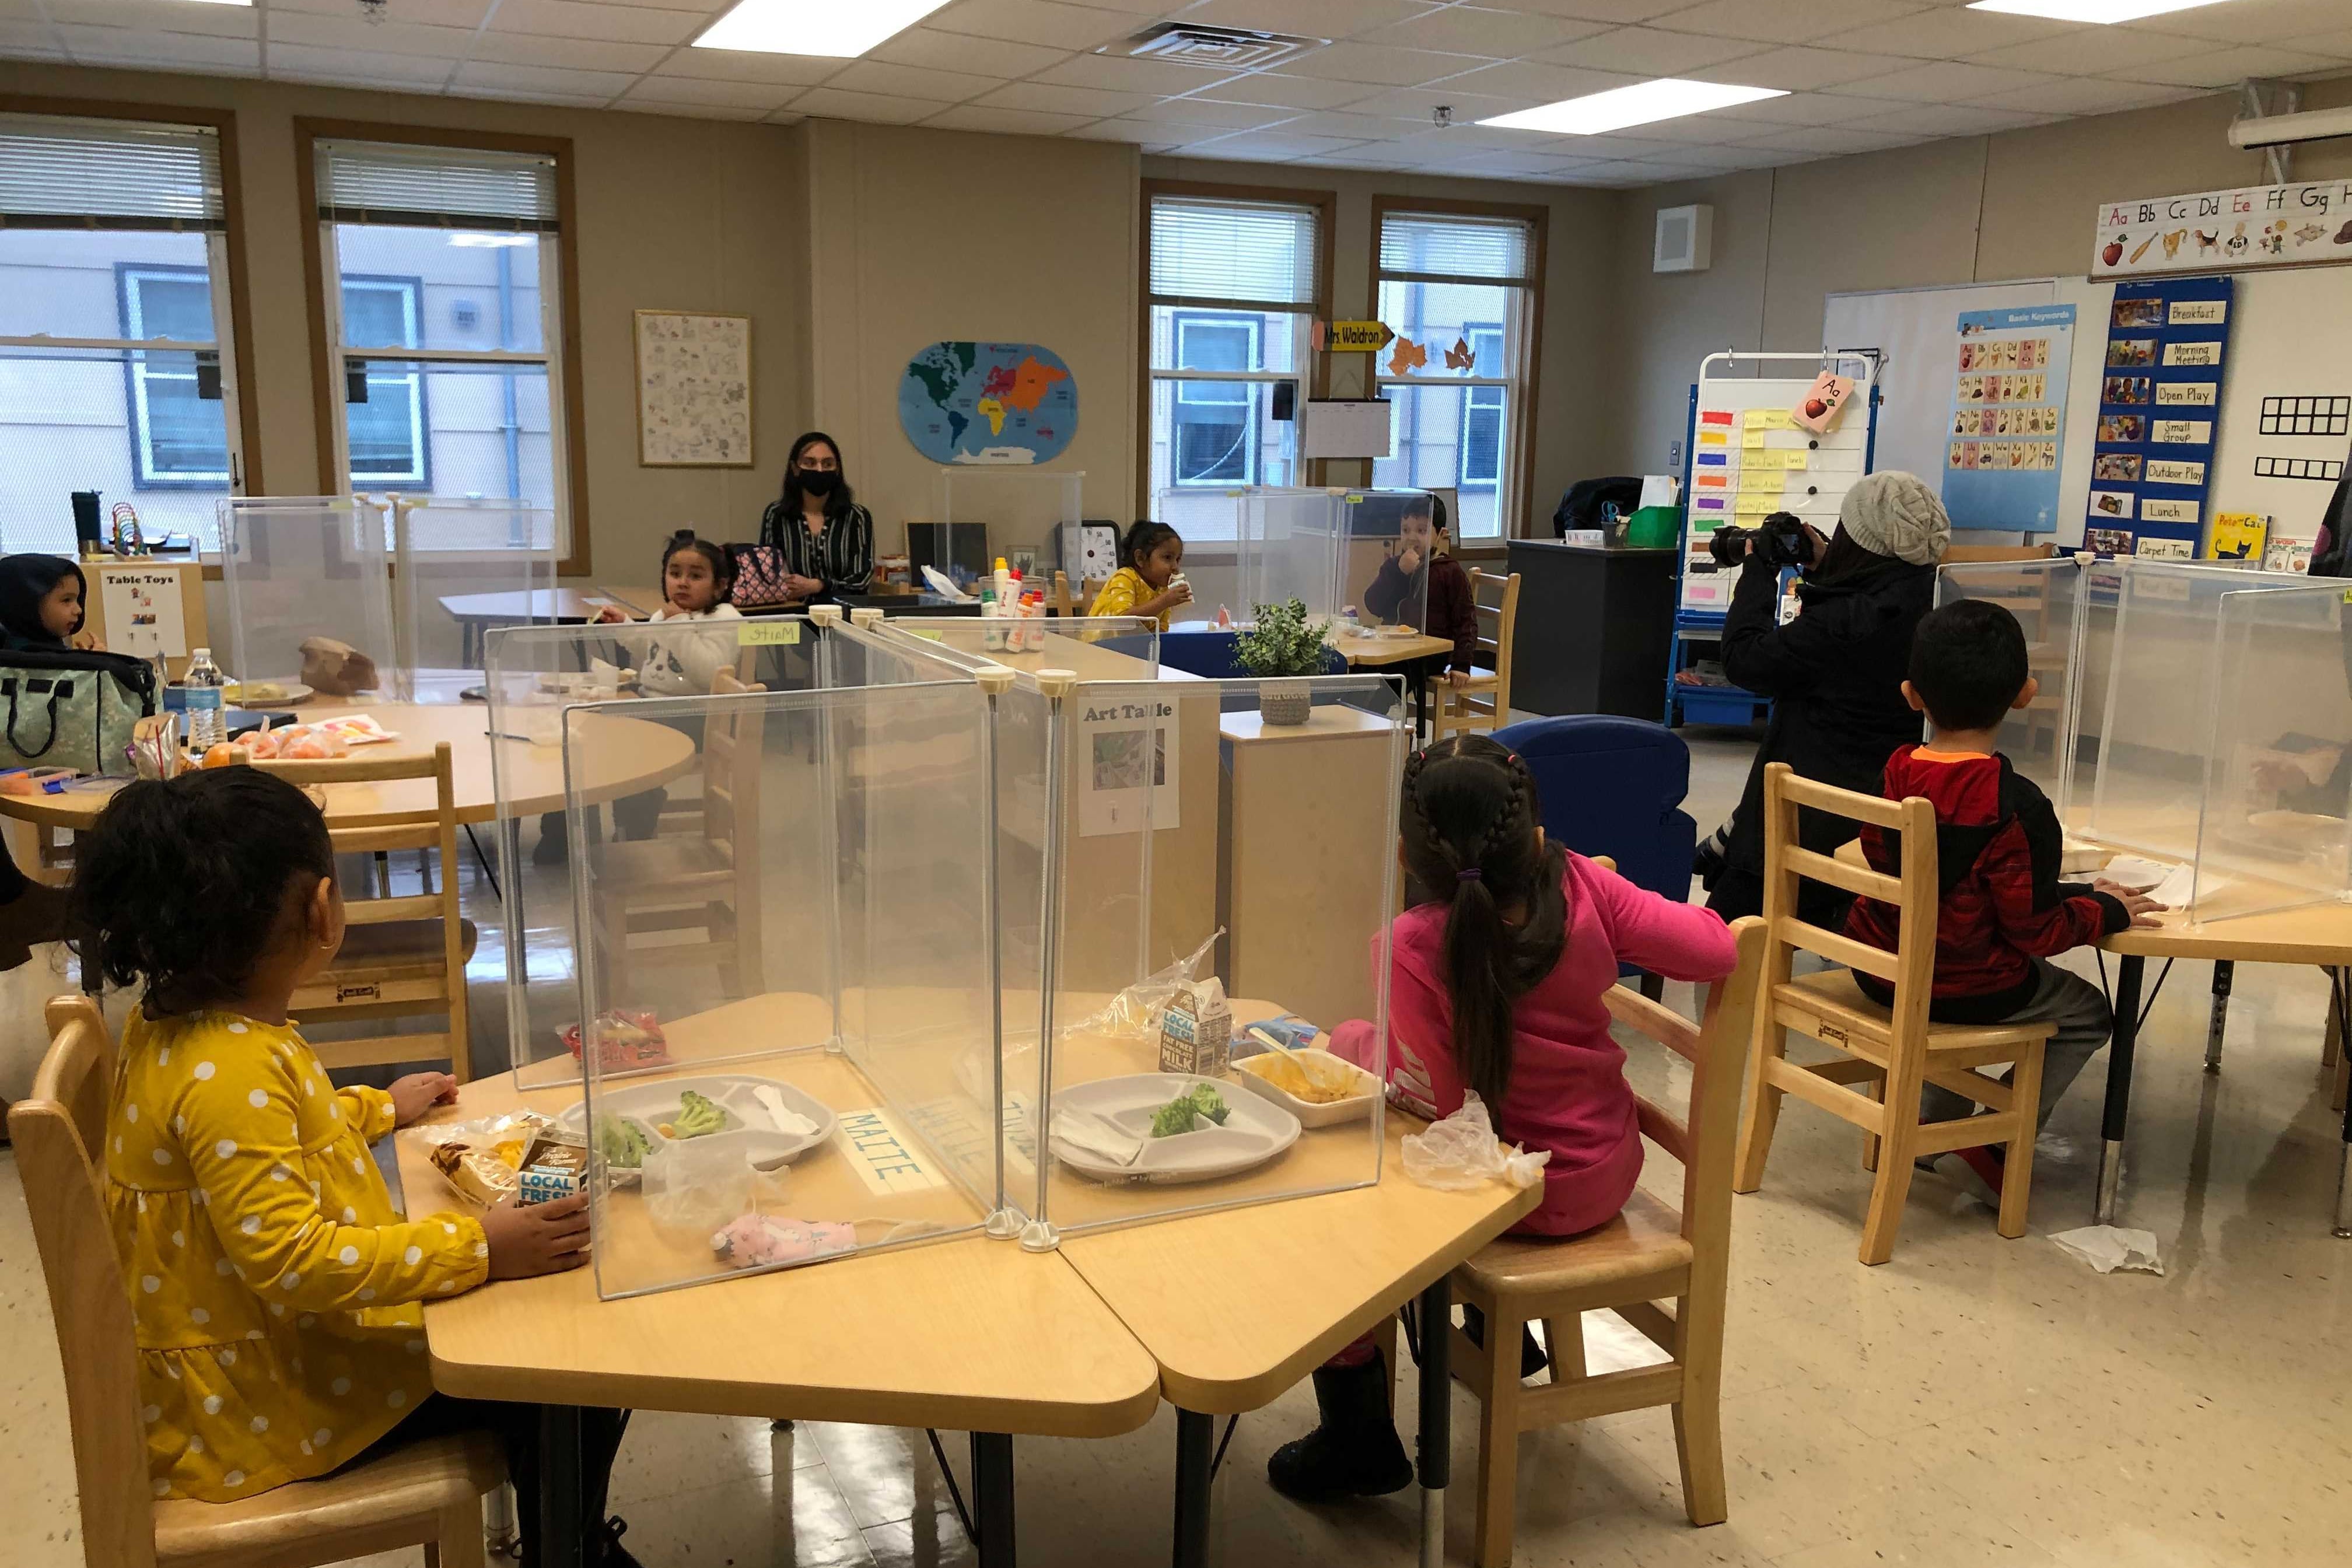 Students eat lunch behind Plexiglass shields at Dawes Elementary in Chicago’s Ashburn neighborhood. Chicago reopened schools Monday to about 6,000 students despite opposition to the plan from its teachers’ union.